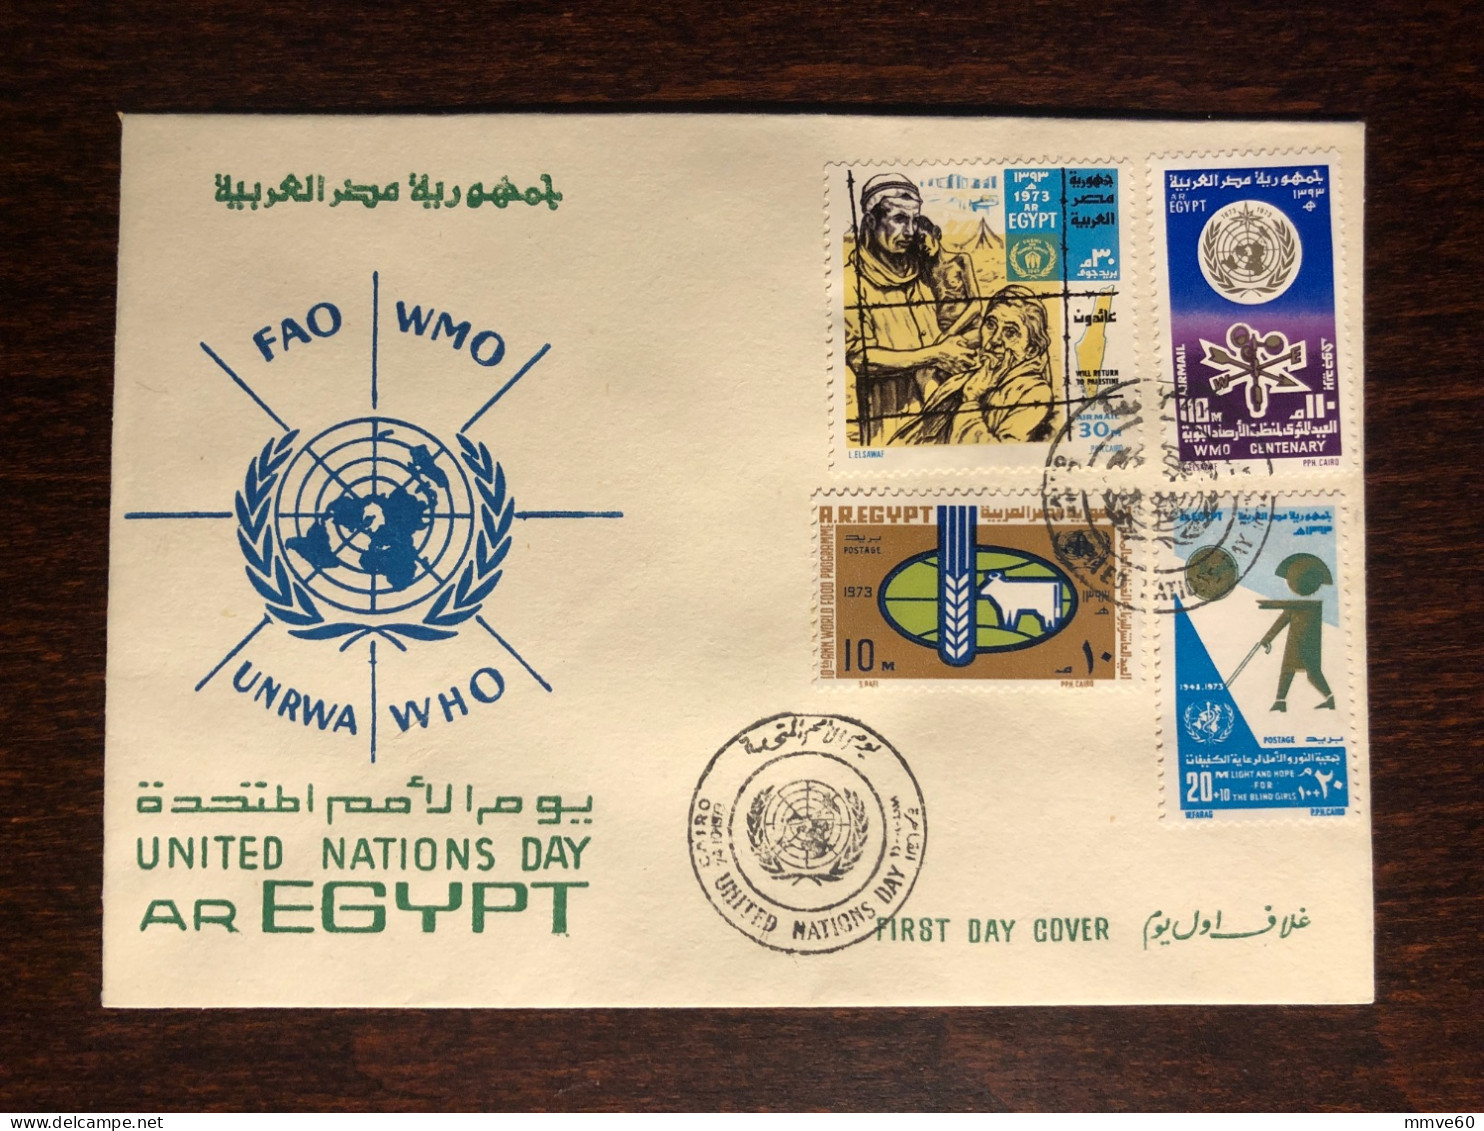 EGYPT FDC COVER 1973 YEAR WHO OPHTHALMOLOGY HEALTH MEDICINE - Covers & Documents